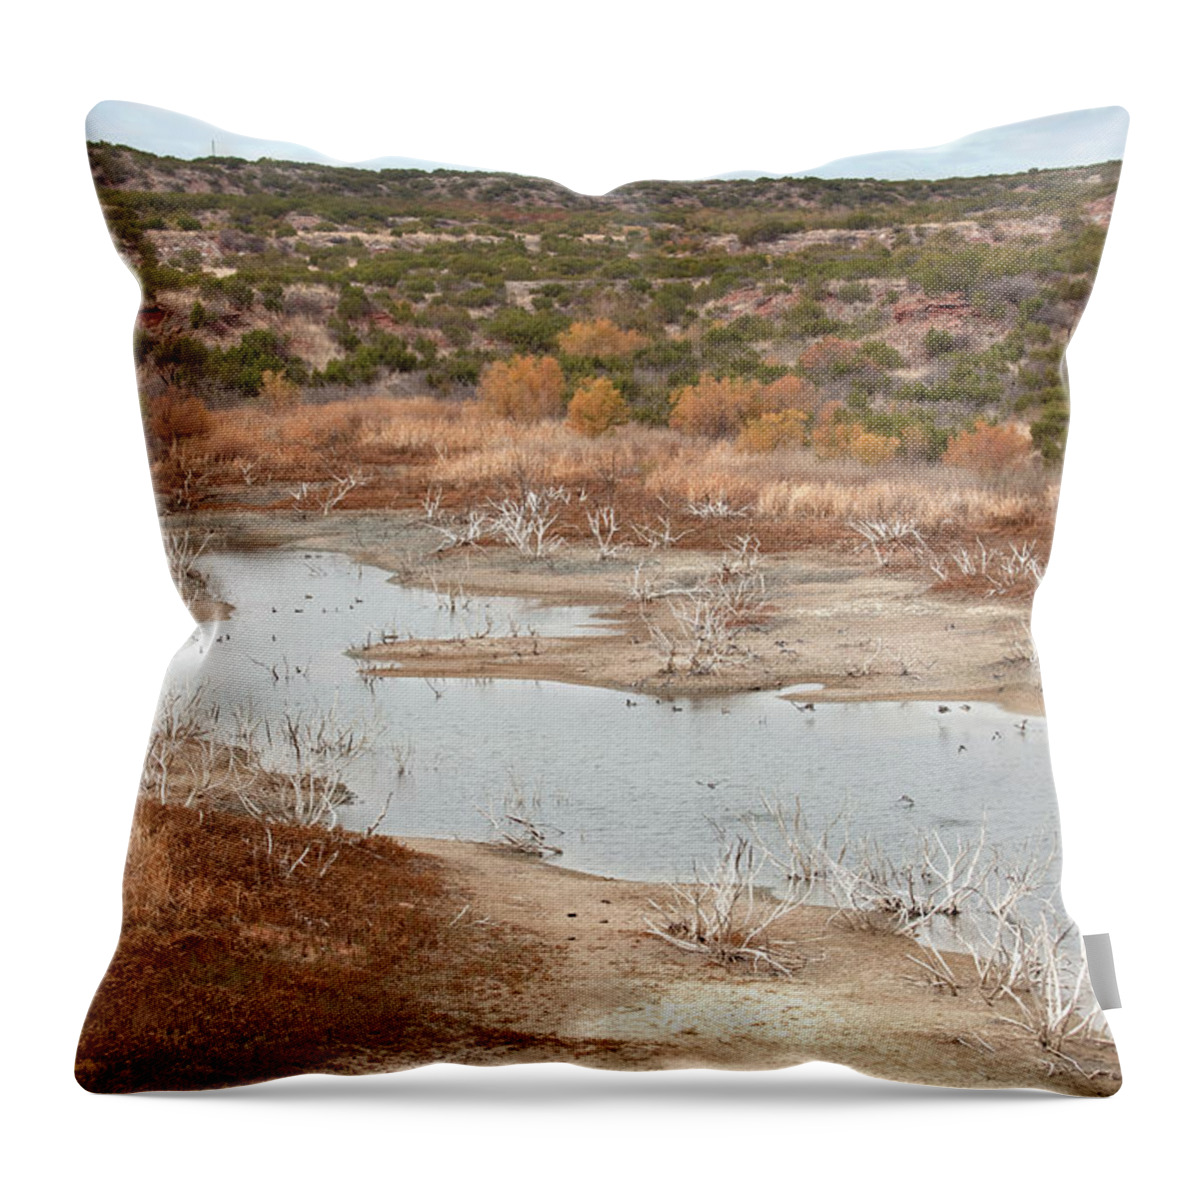 Reservoir Throw Pillow featuring the photograph Drought Conditions Low Water Reservoir by Milehightraveler